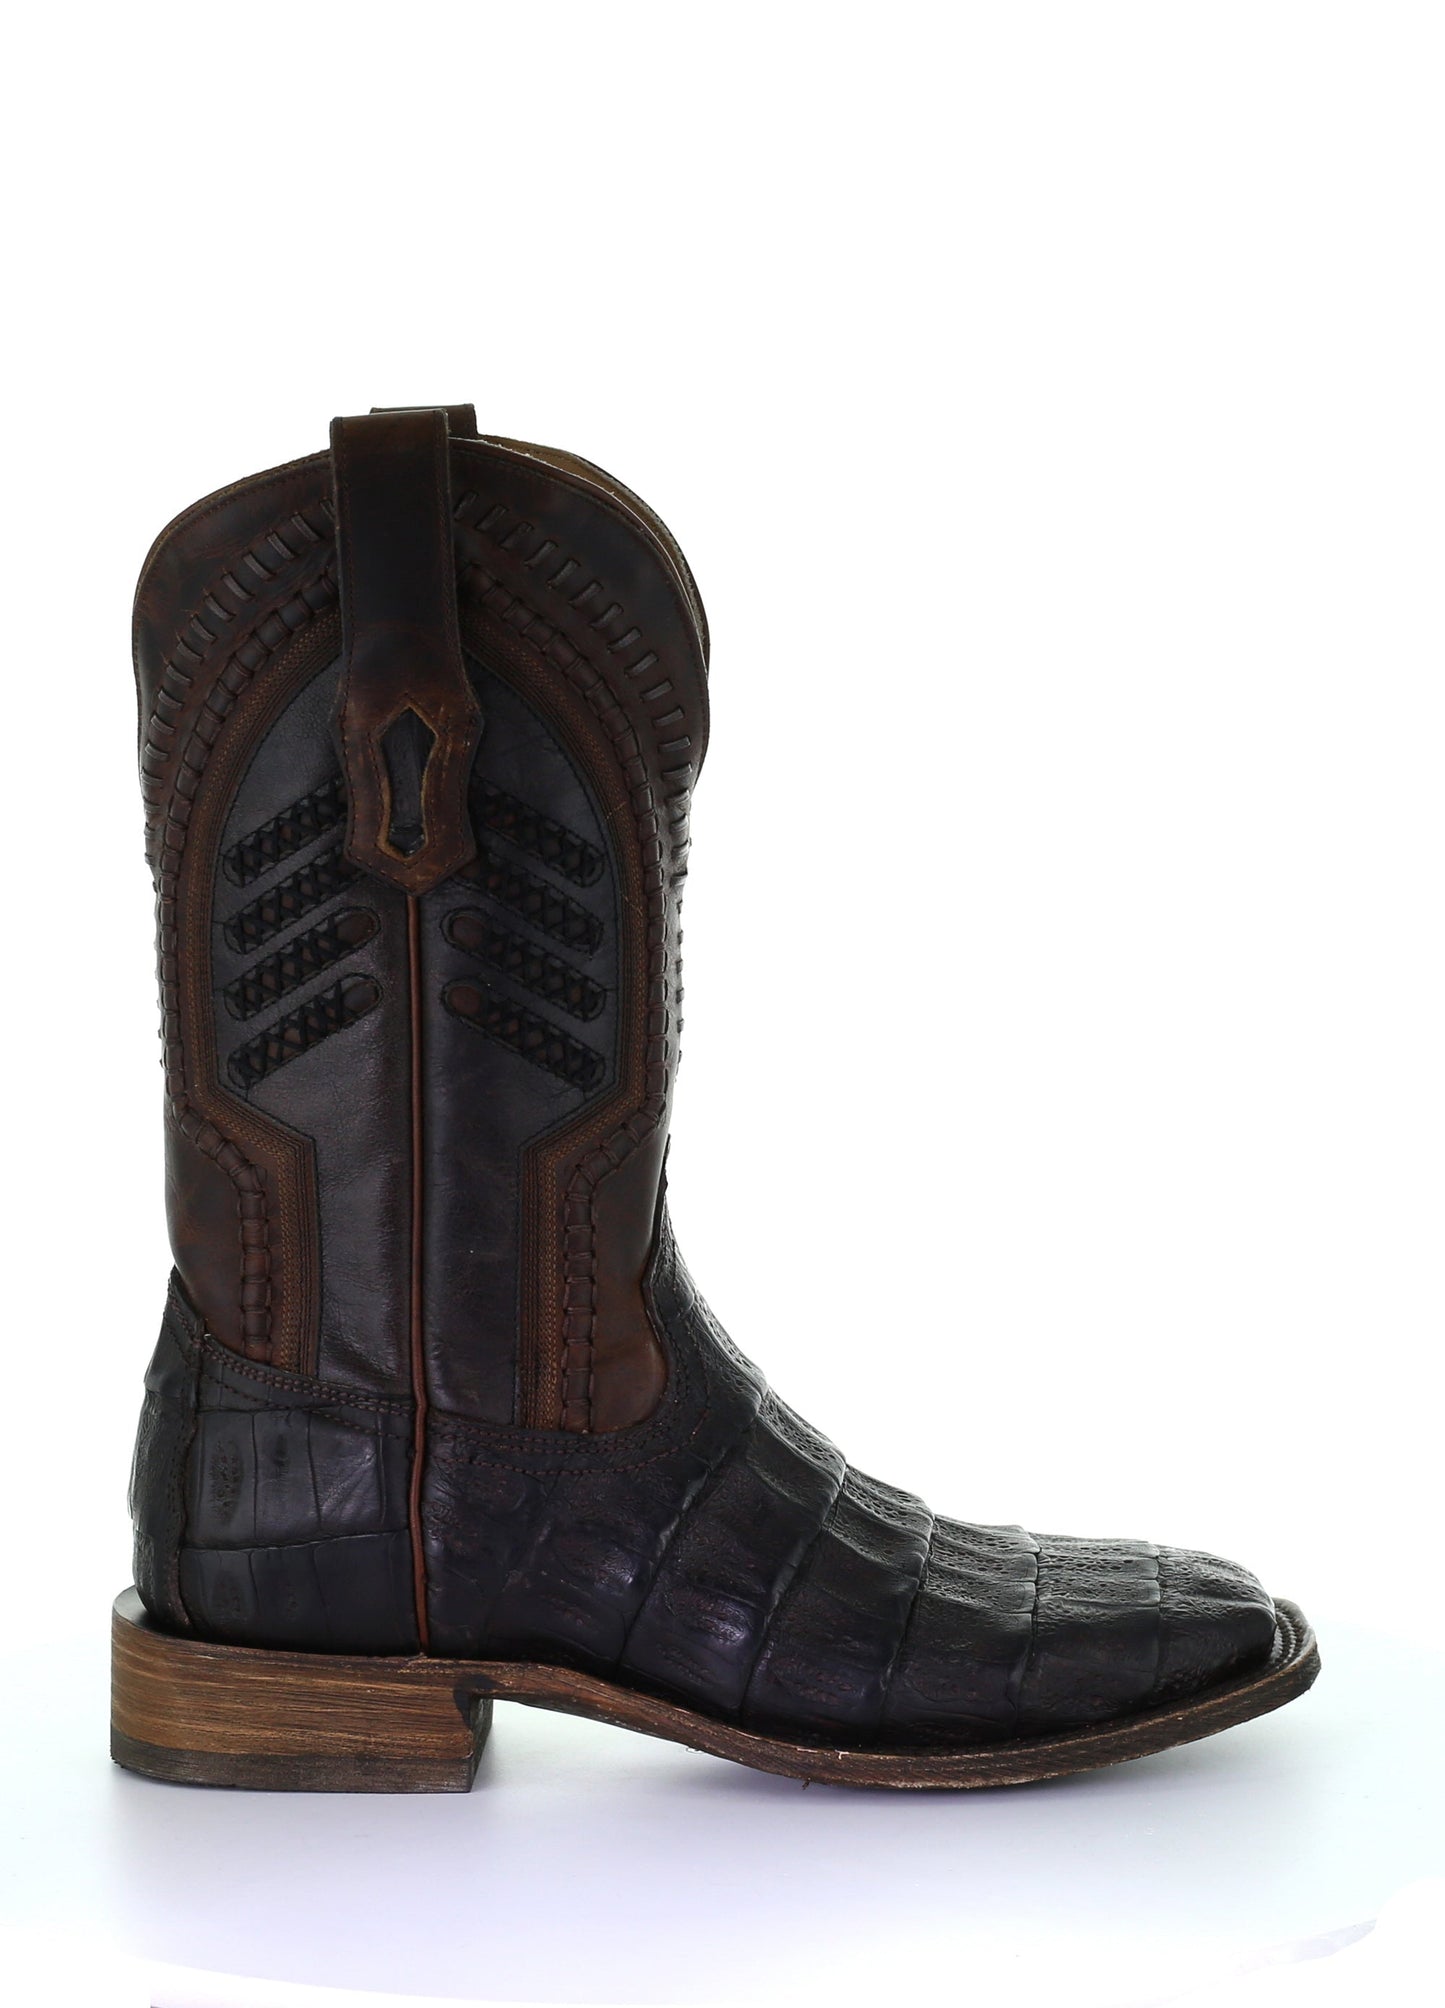 A3878 - Corral brown western cowboy caiman boots for men-Kuet.us